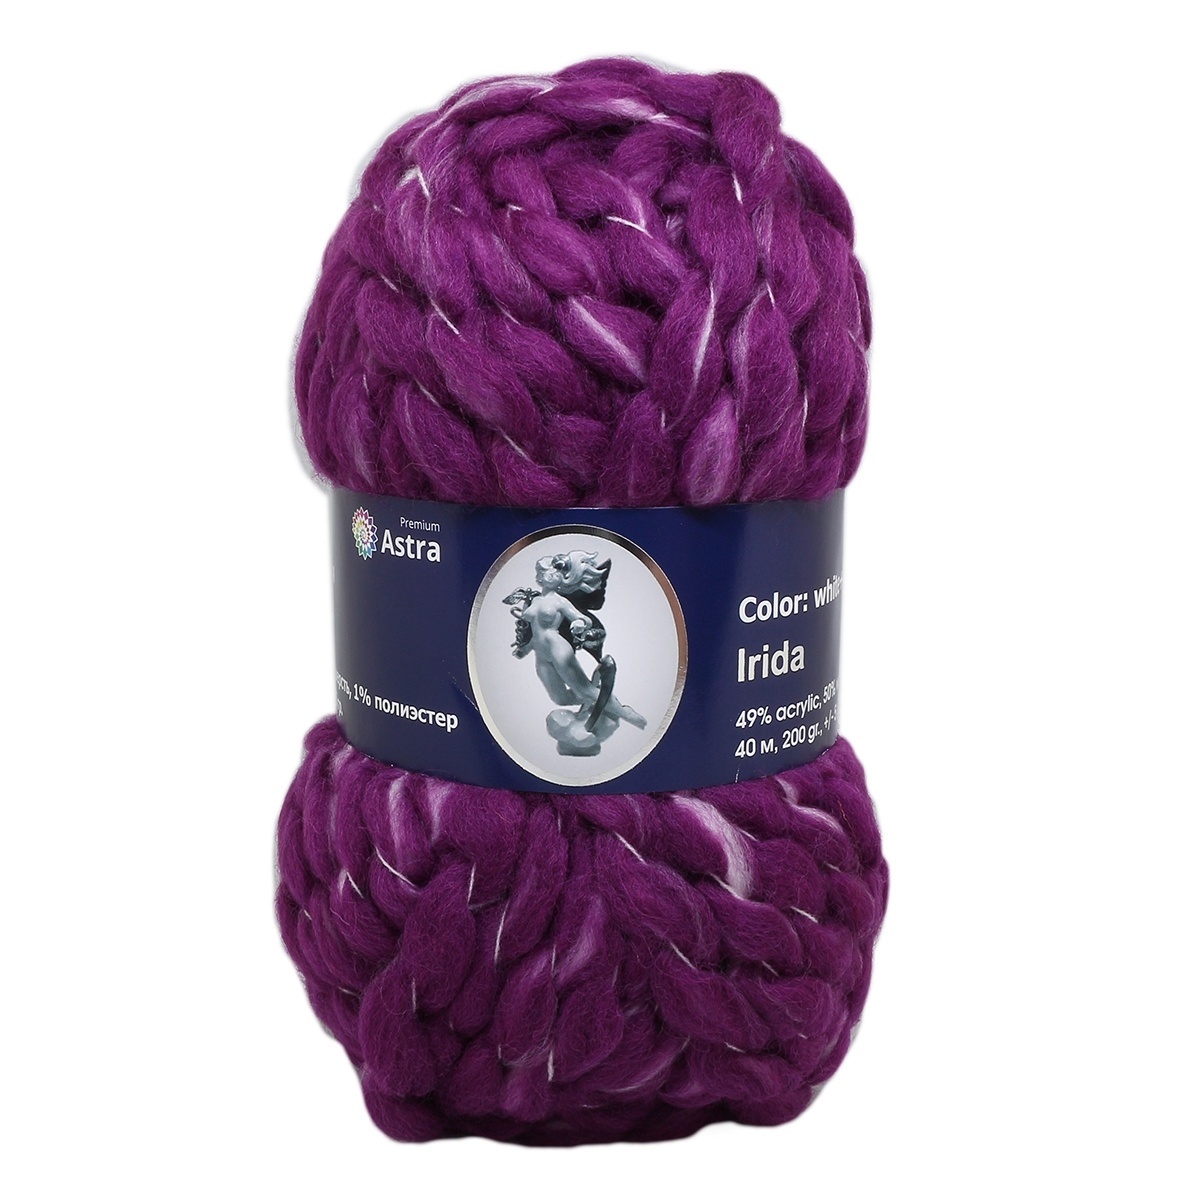 Astra Premium Iris, 50% wool, 49% acrylic, 1% polyester, 2 Skein Value Pack, 400g фото 10